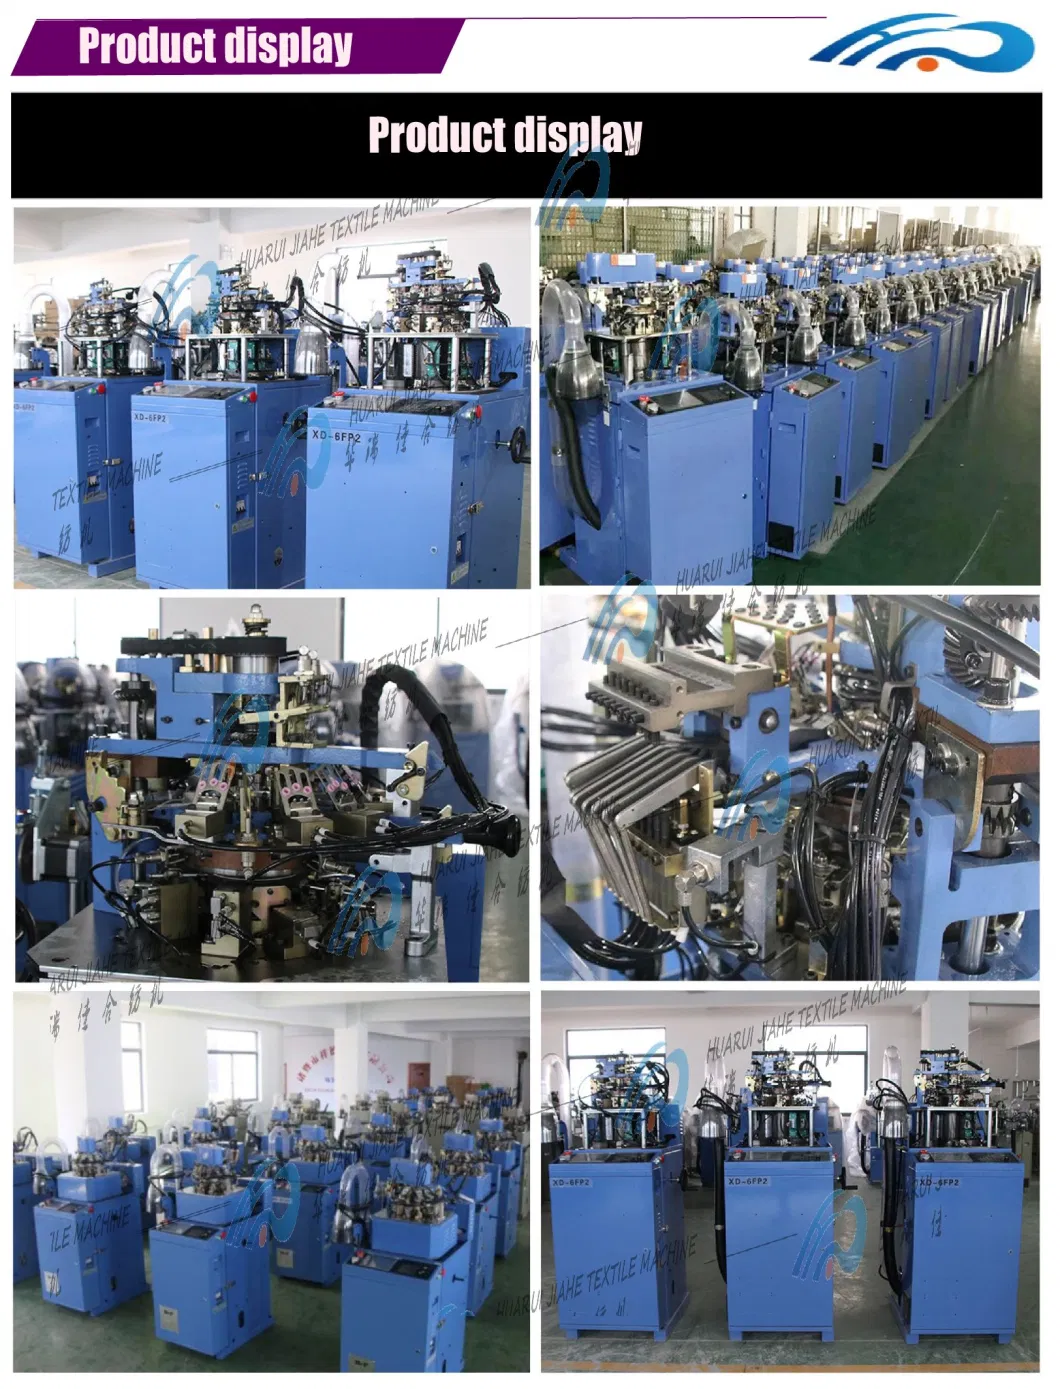 Computerized 3.75 Terry and Socks Plain Automatic Sock Knitting Machine Socks Knitting Machine Socks Machine Hosiery Machinery Socks Machines Looking for Dealer